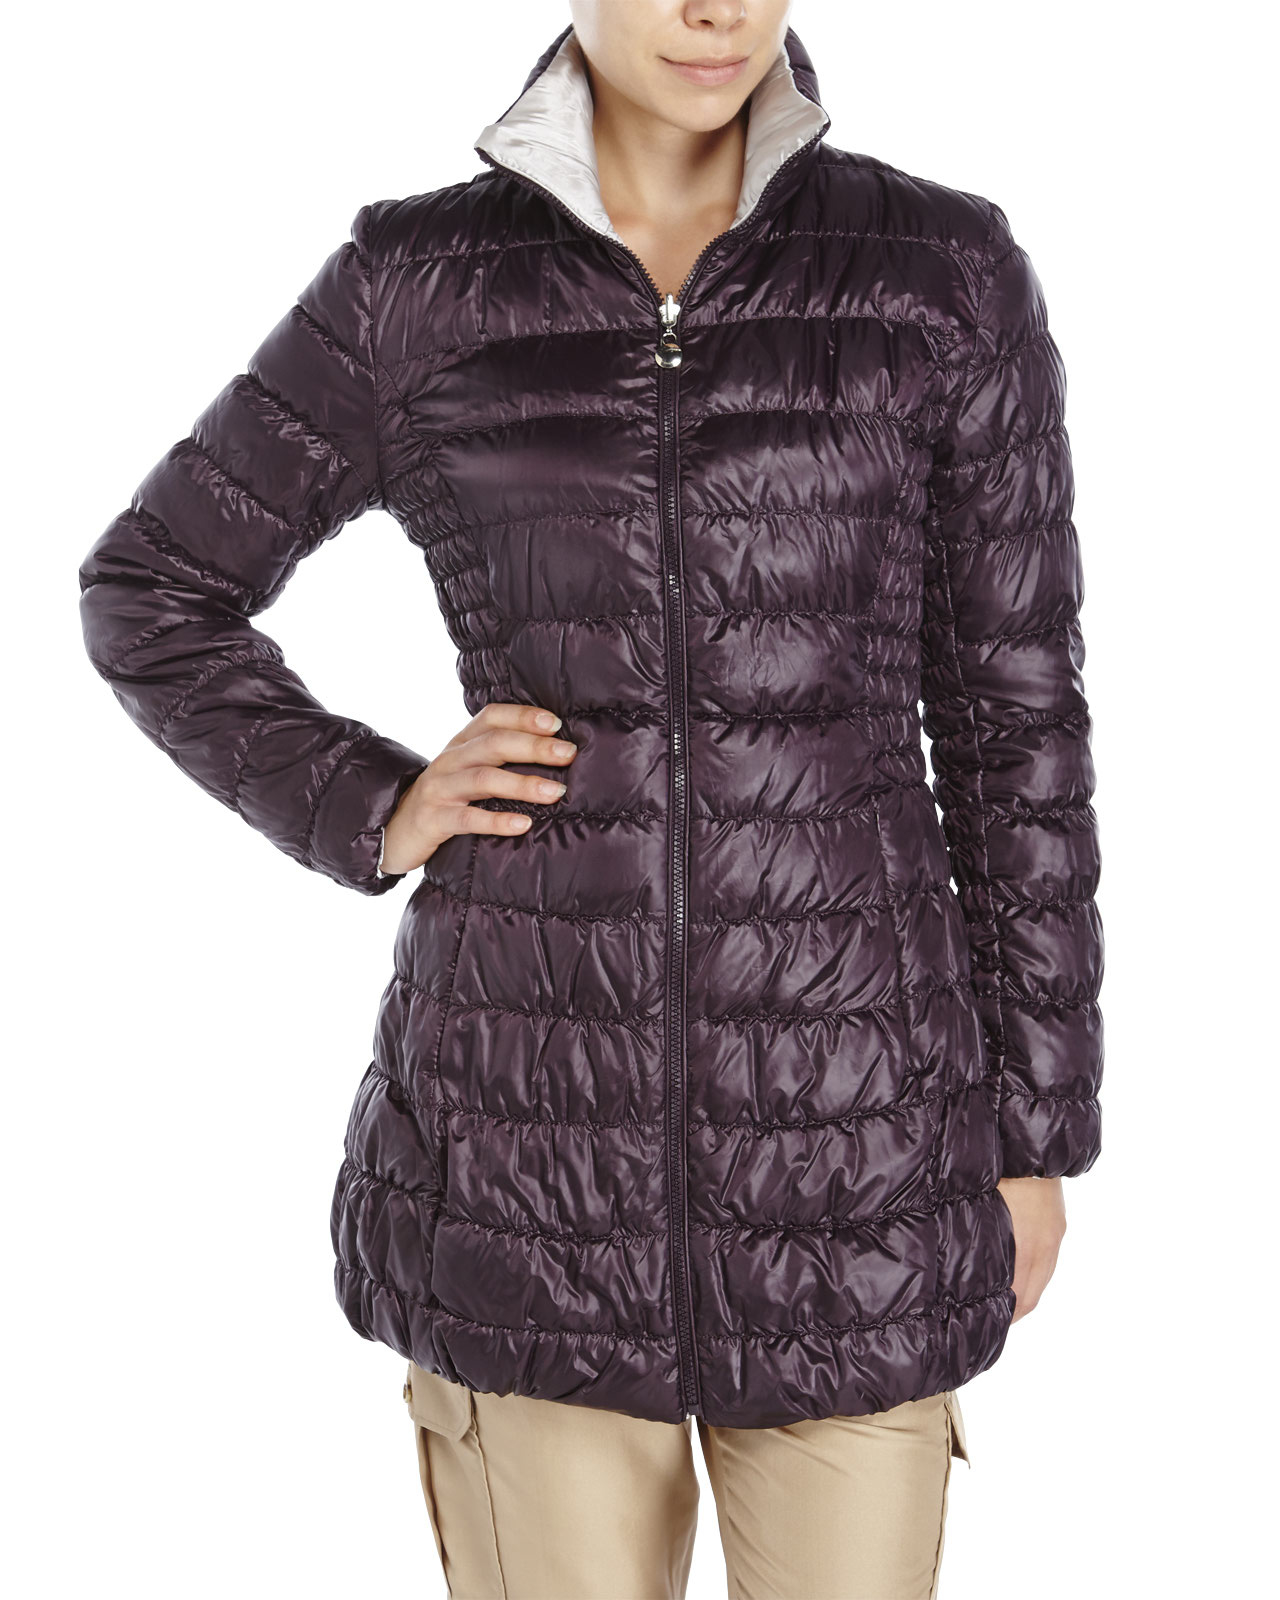 Laundry by shelli segal Reversible Quilted Down Coat in Purple ...